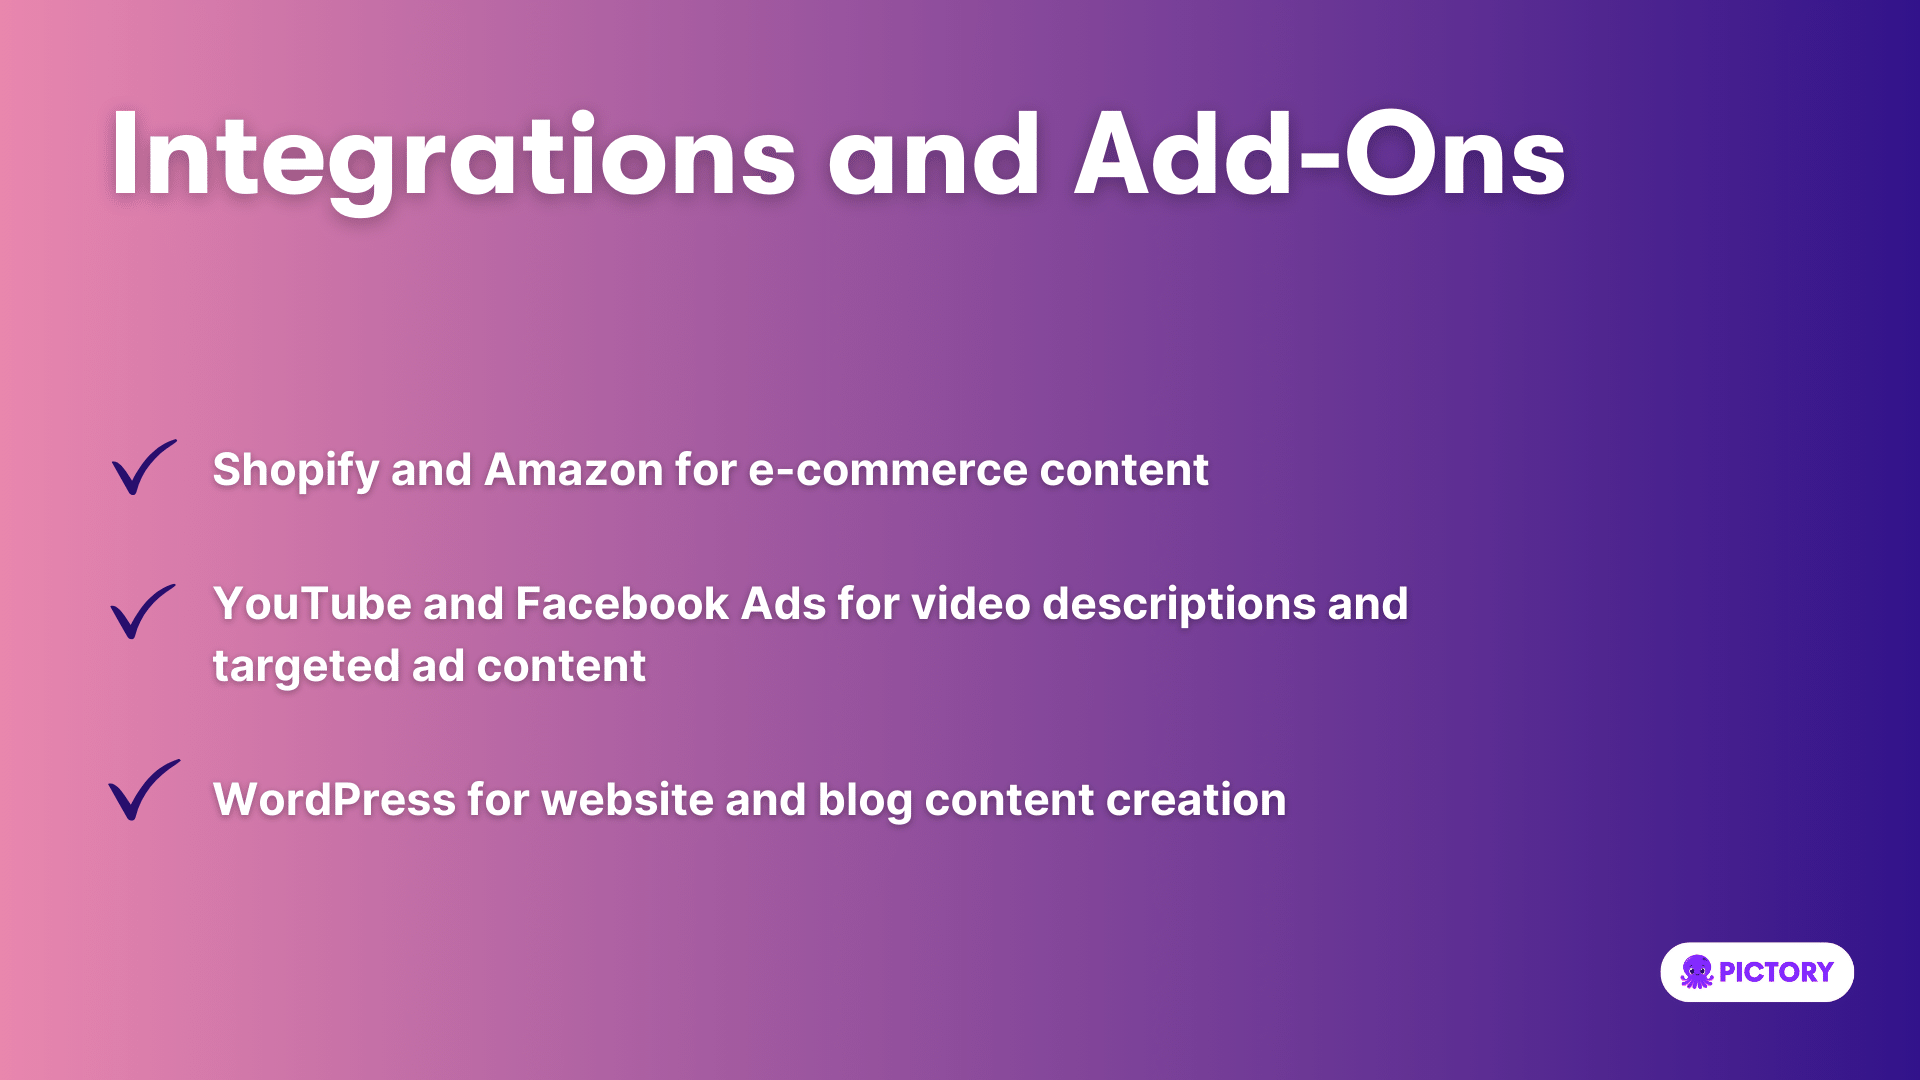 Integrations and Add-Ons infographic